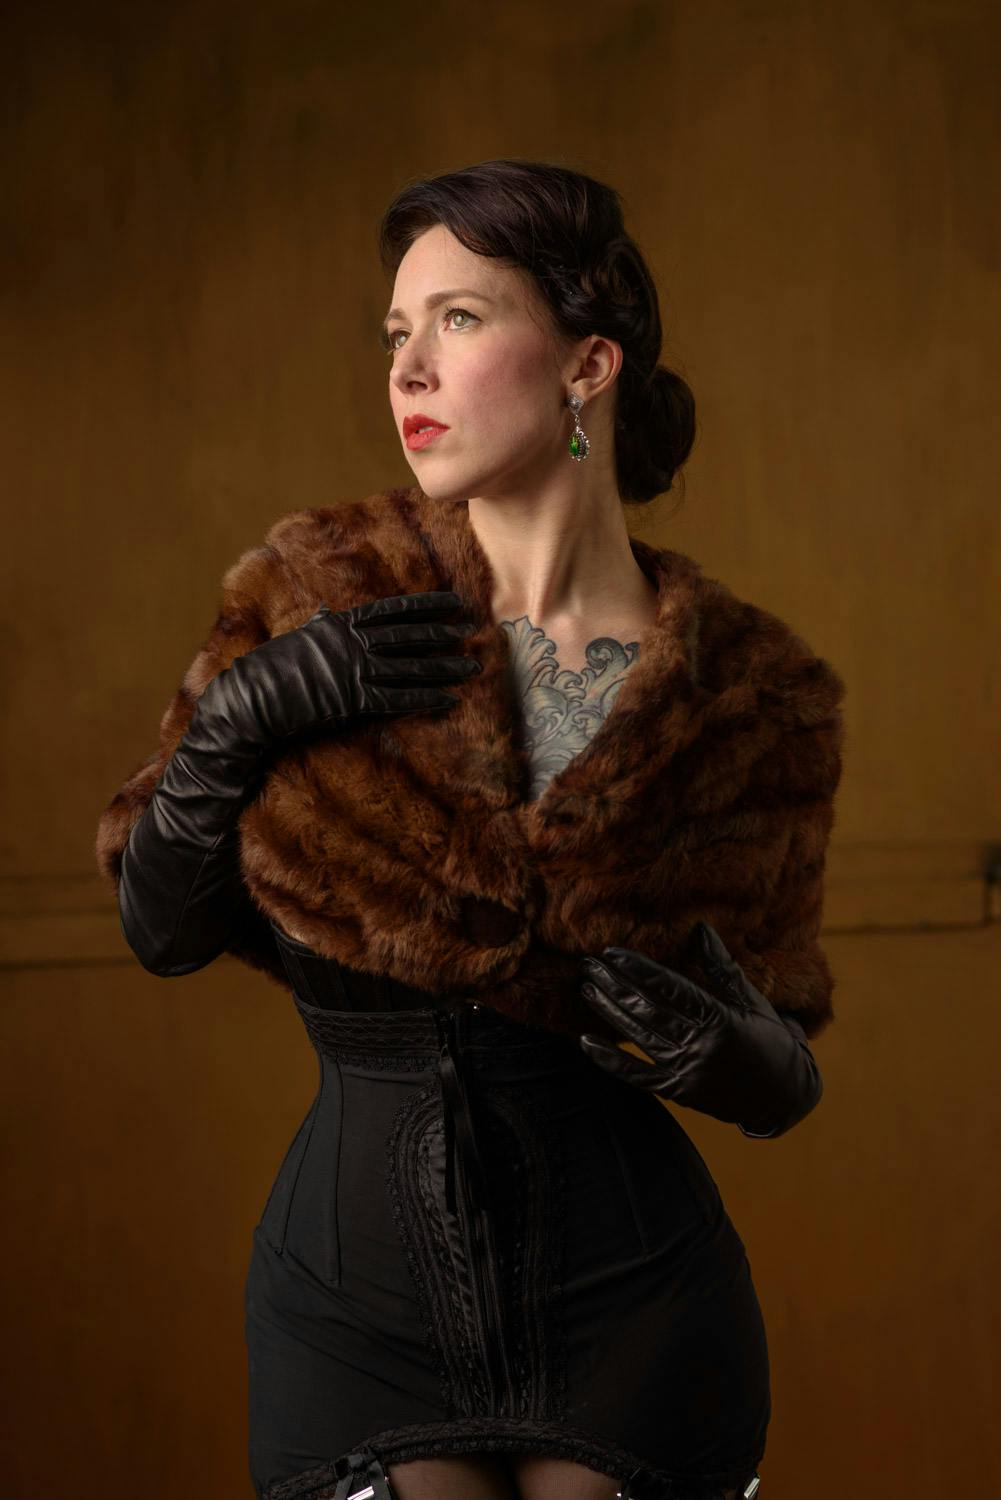 Portrait of woman wearing a fur shawl, long leather black gloves and an Edwardian styled corset in front of a copper colored backdrop.